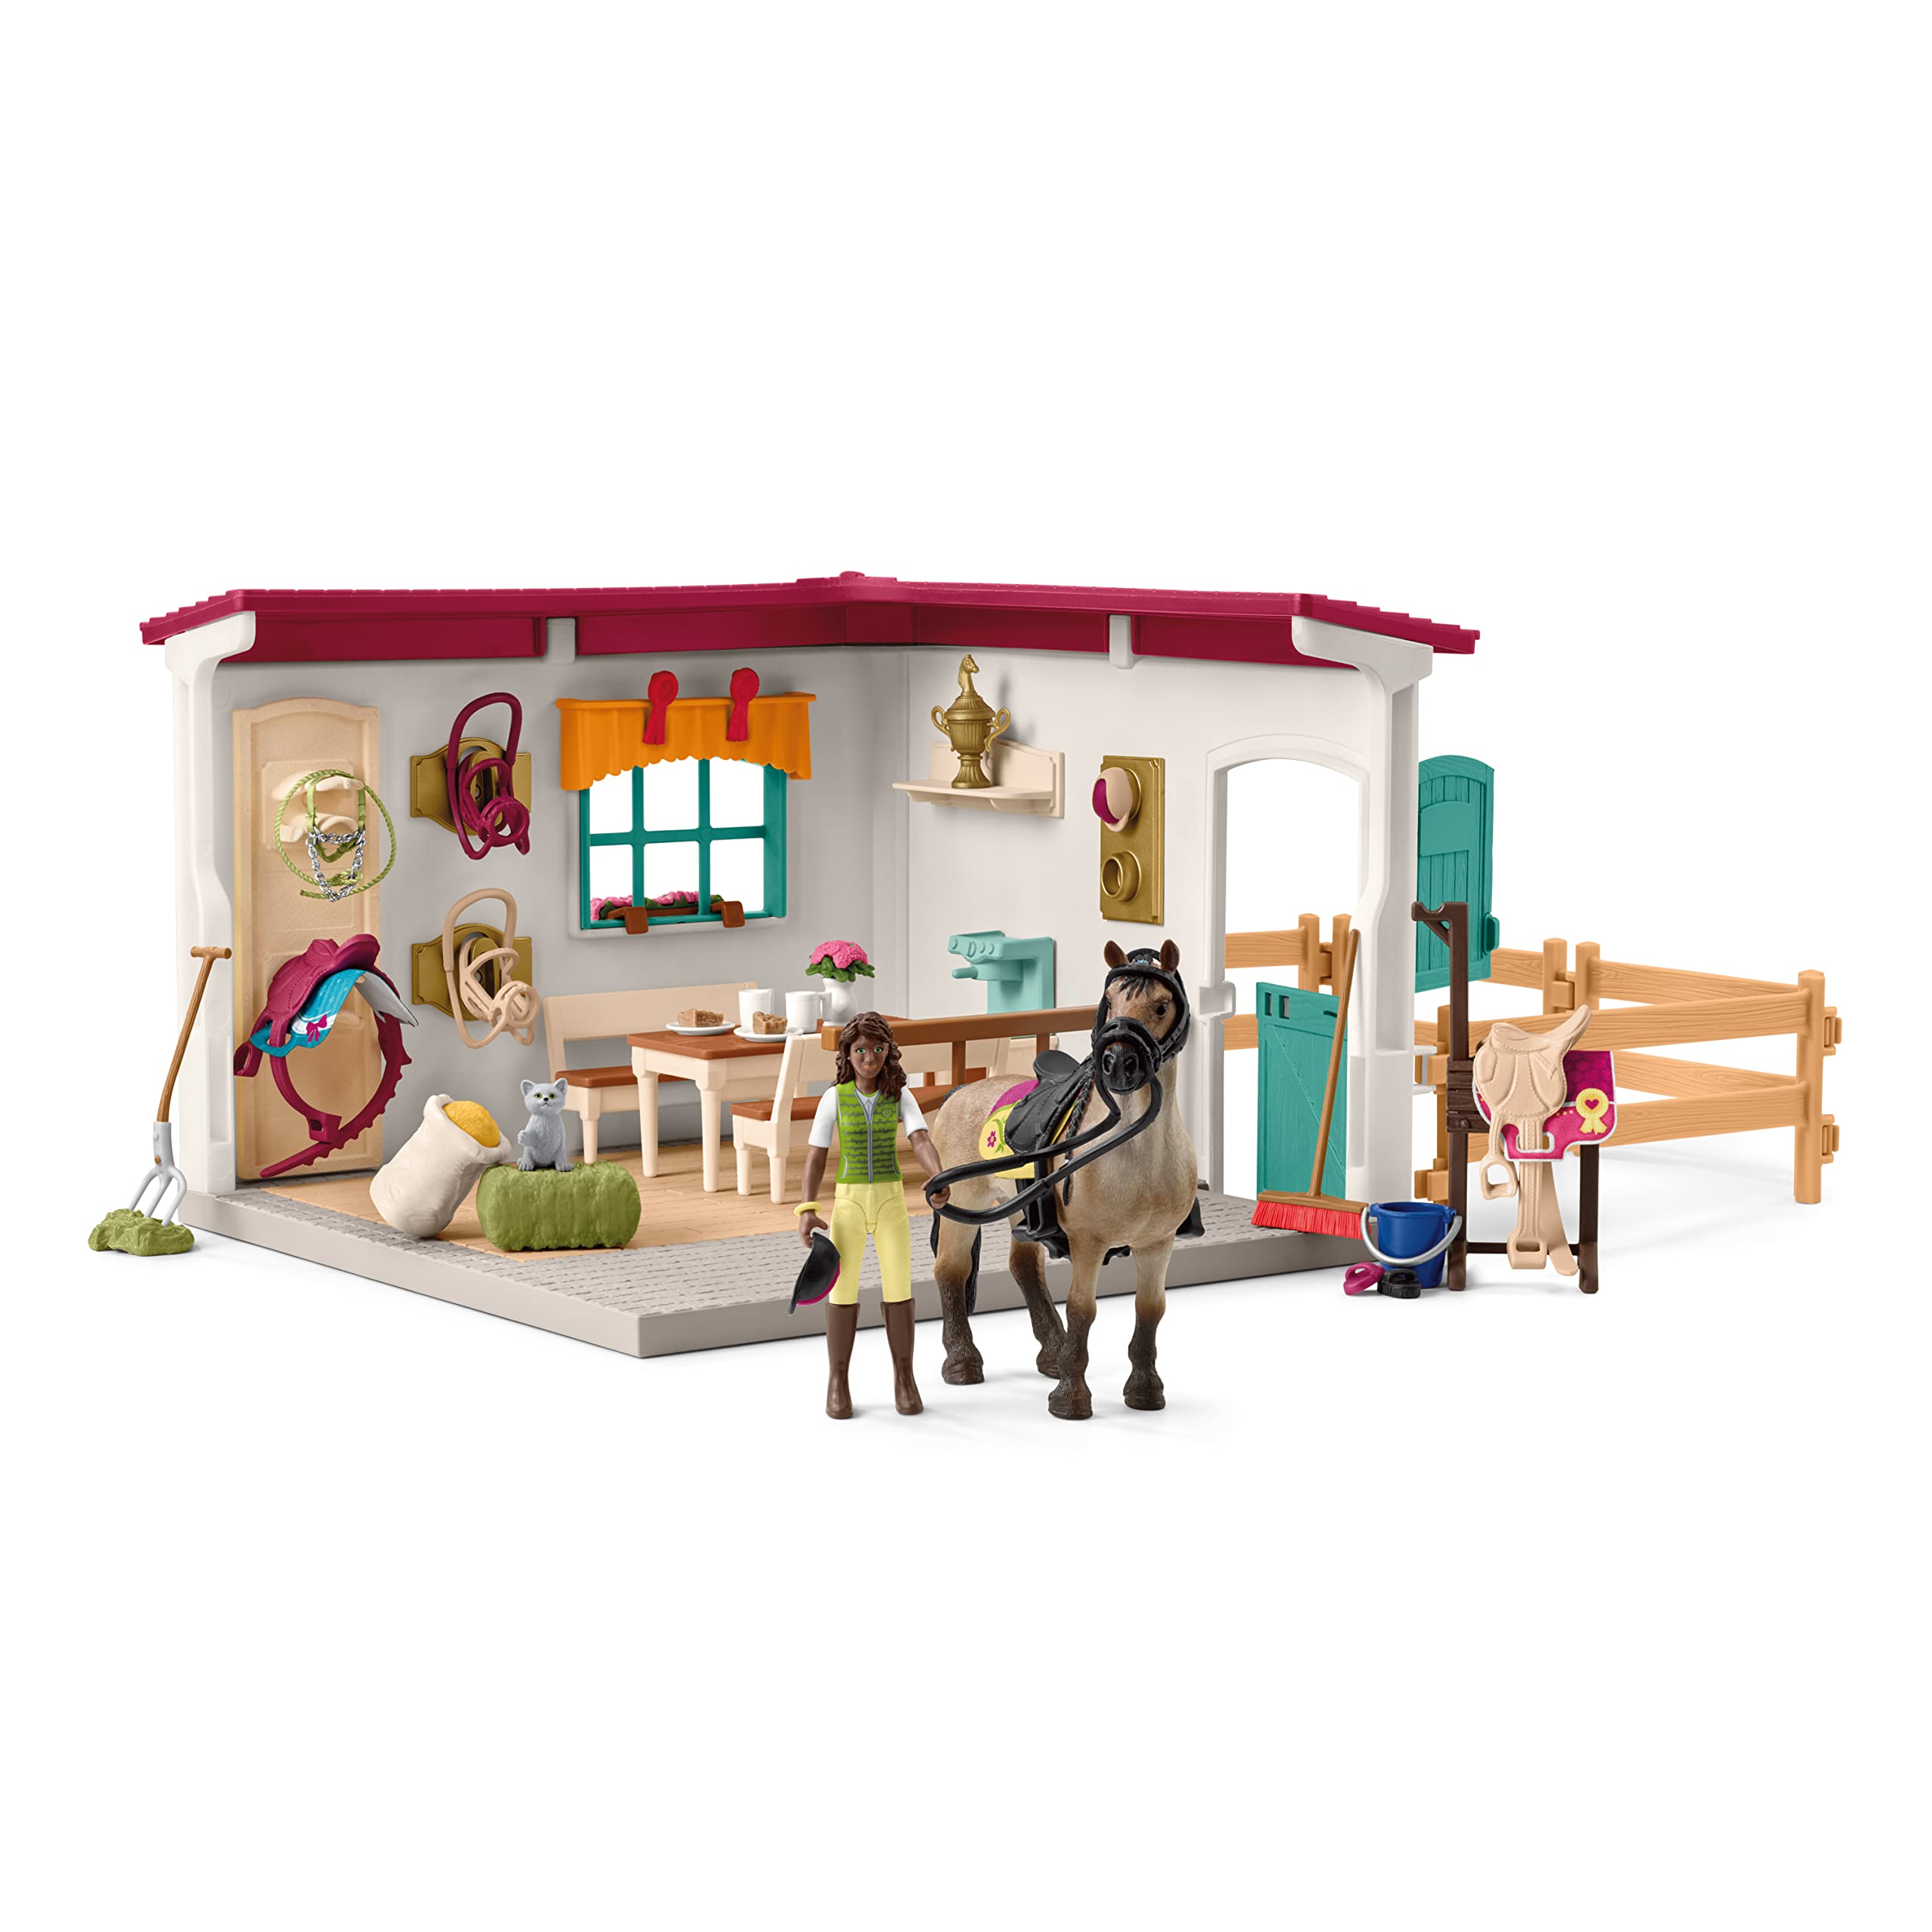 Schleich Horse Club, Horse Sets for Girls and Boys, Tack Room with Dolls, Horse Toys, and Accessories, Extension for Lakeside Riding Center, Ages 5+